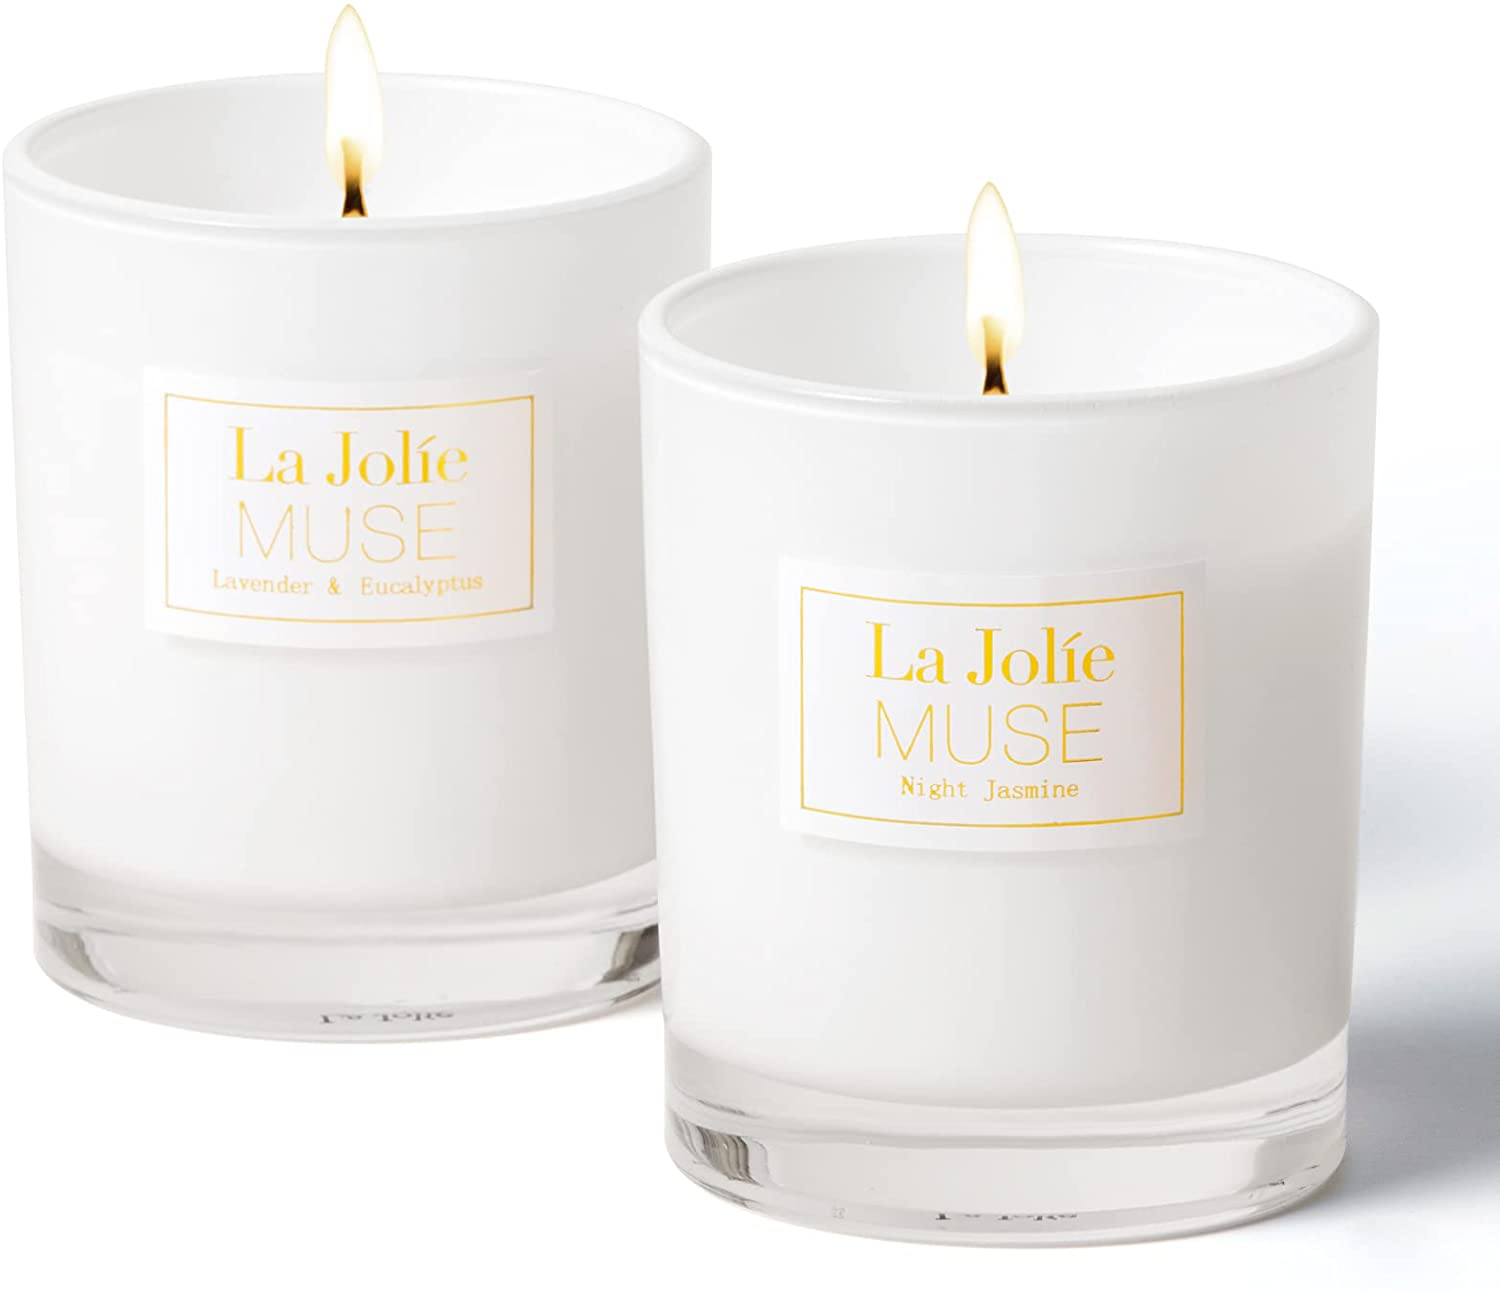 LA JOLIE MUSE Plumeria Scented Candles for Home, Frangipani Candle Hawaii, Natural Soy Candle for Home Scented, Candle Birthday Gift for Her, 65 Hours Burn